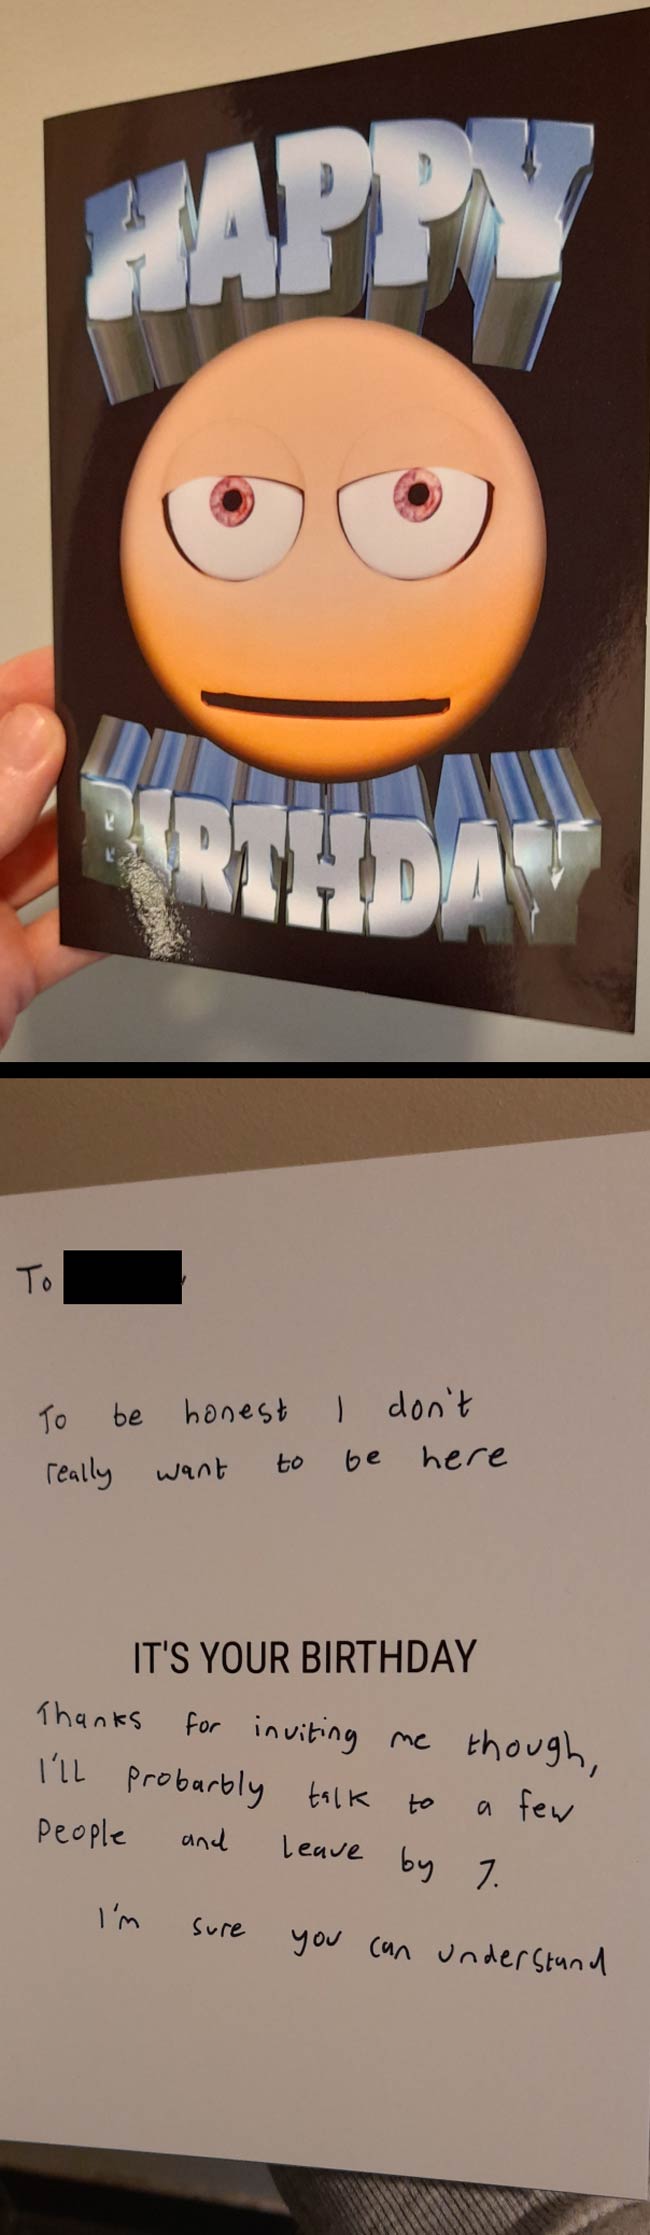 This birthday card my roommate was given at his party